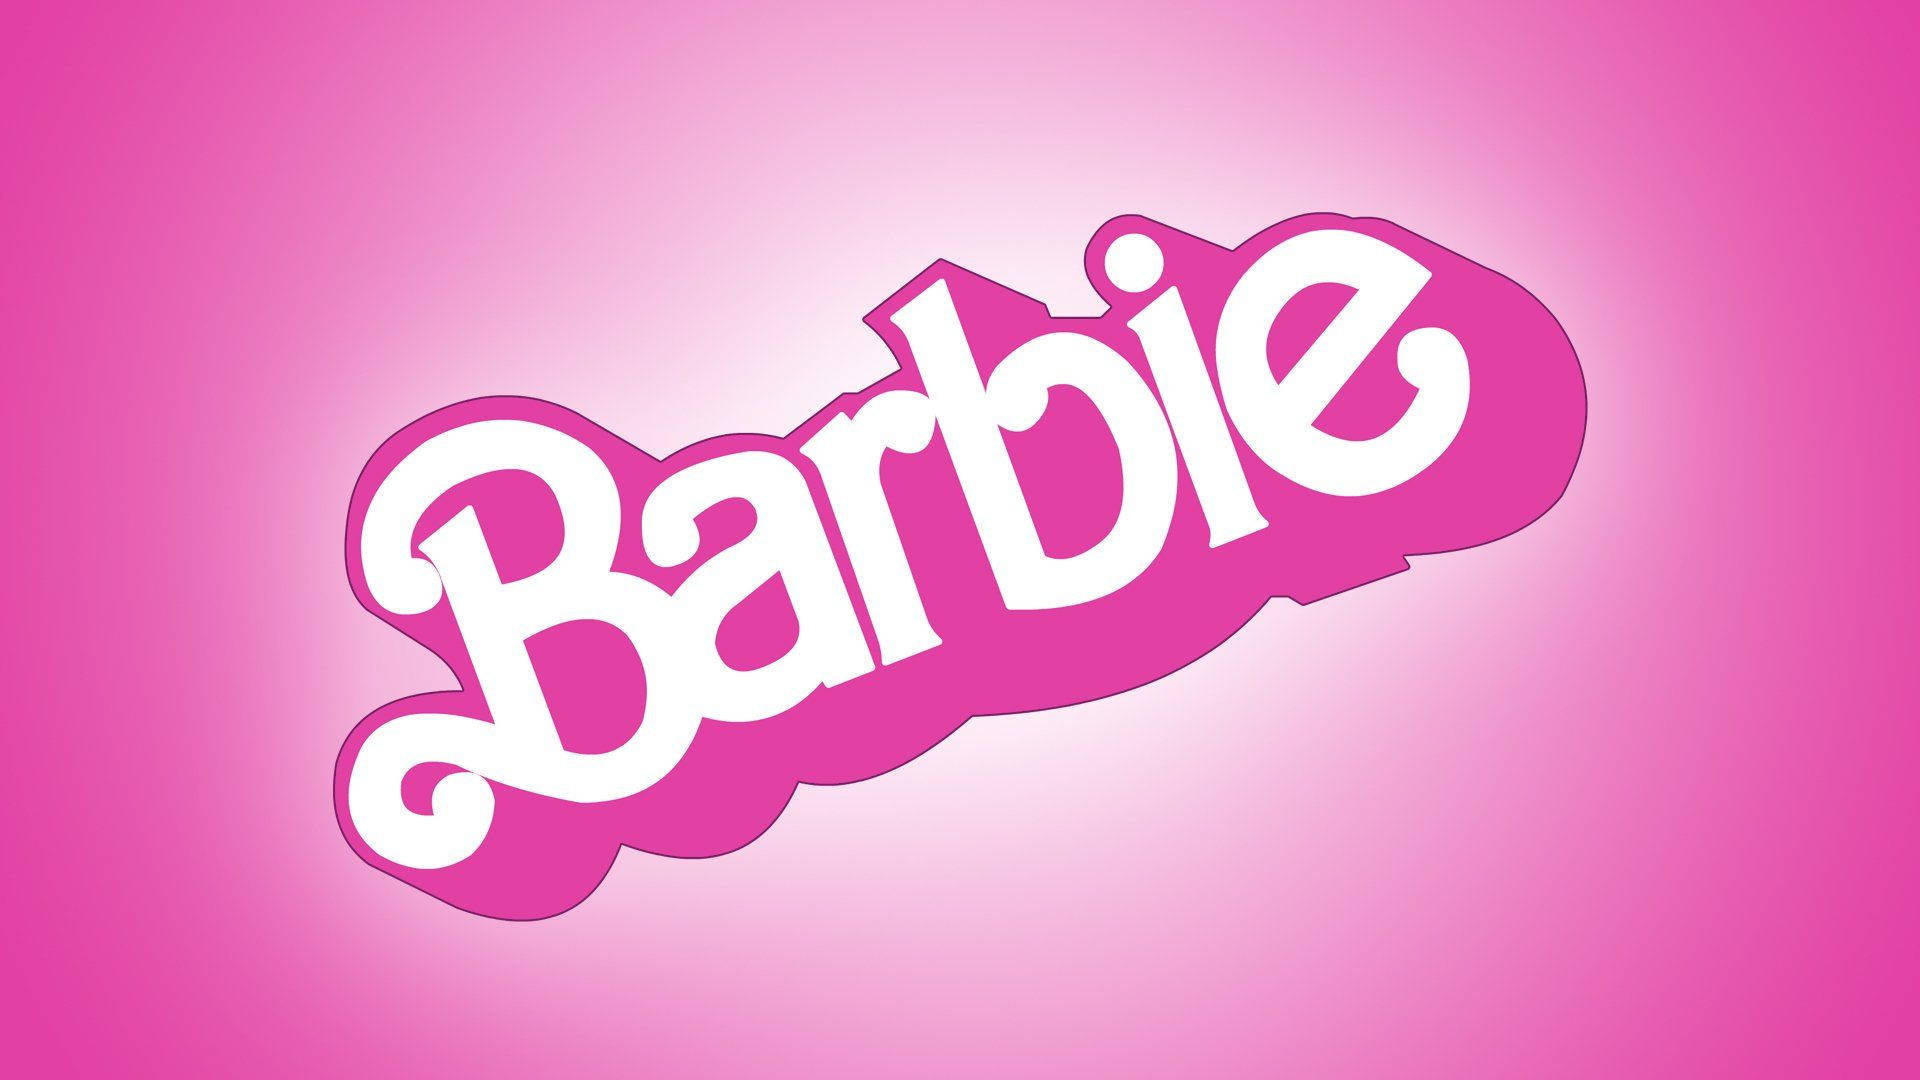 Barbie Brand In Pink Background